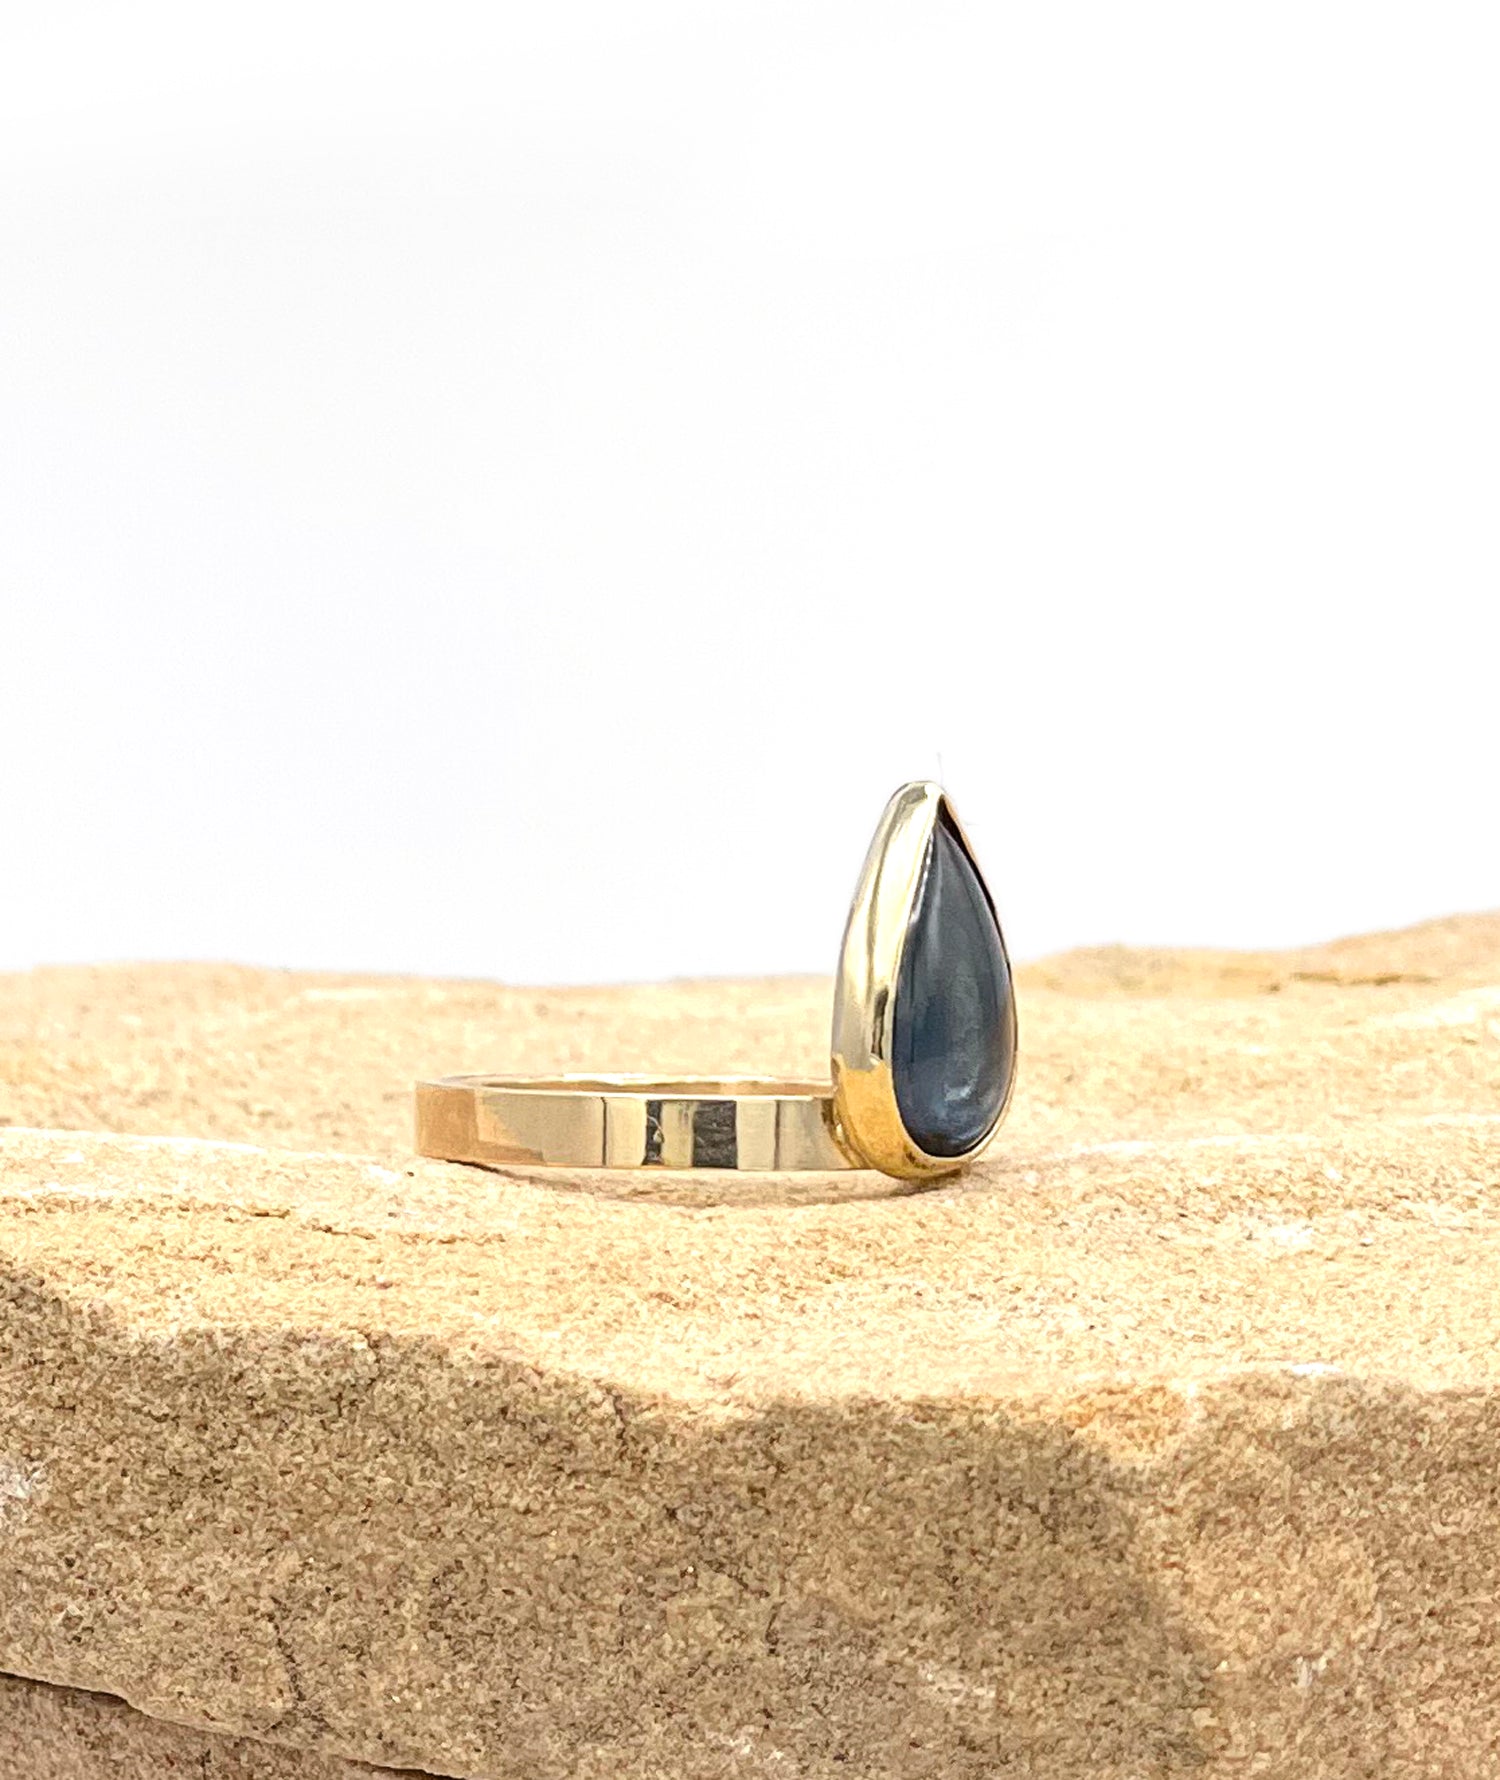 14K Blue Tourmaline ring, Solid Gold, Collectors tourmaline ring